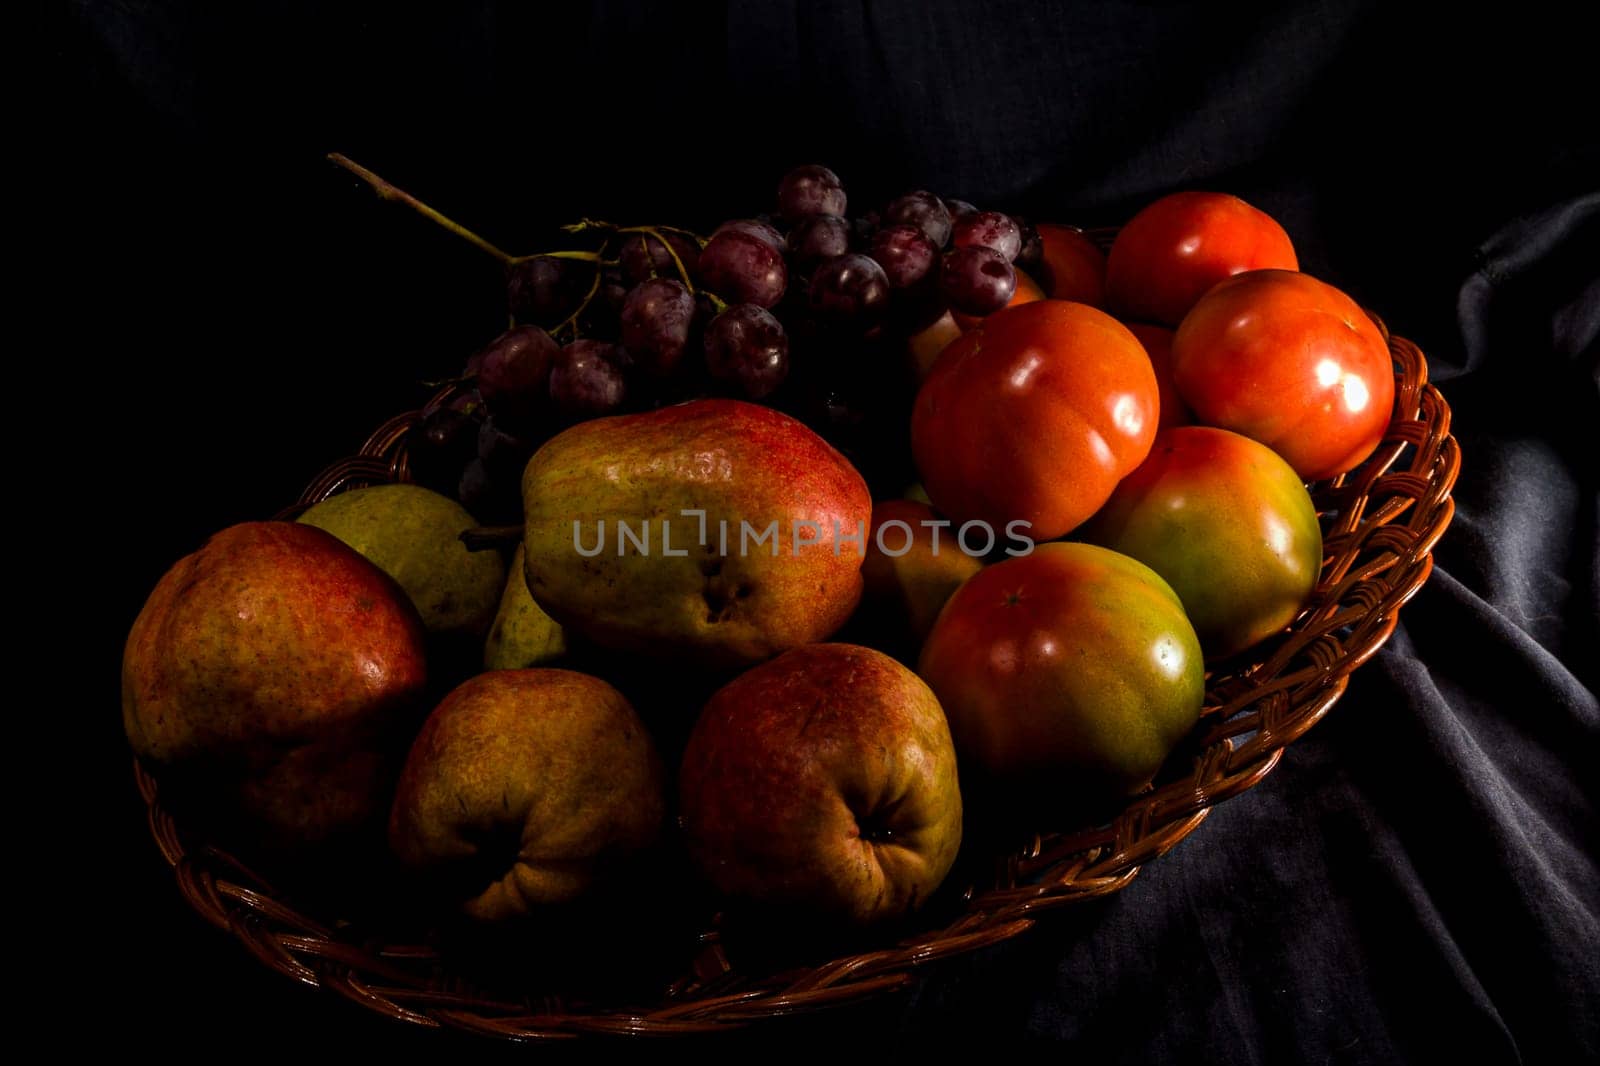 Composition of pears, tomatoes and grapes in a basket